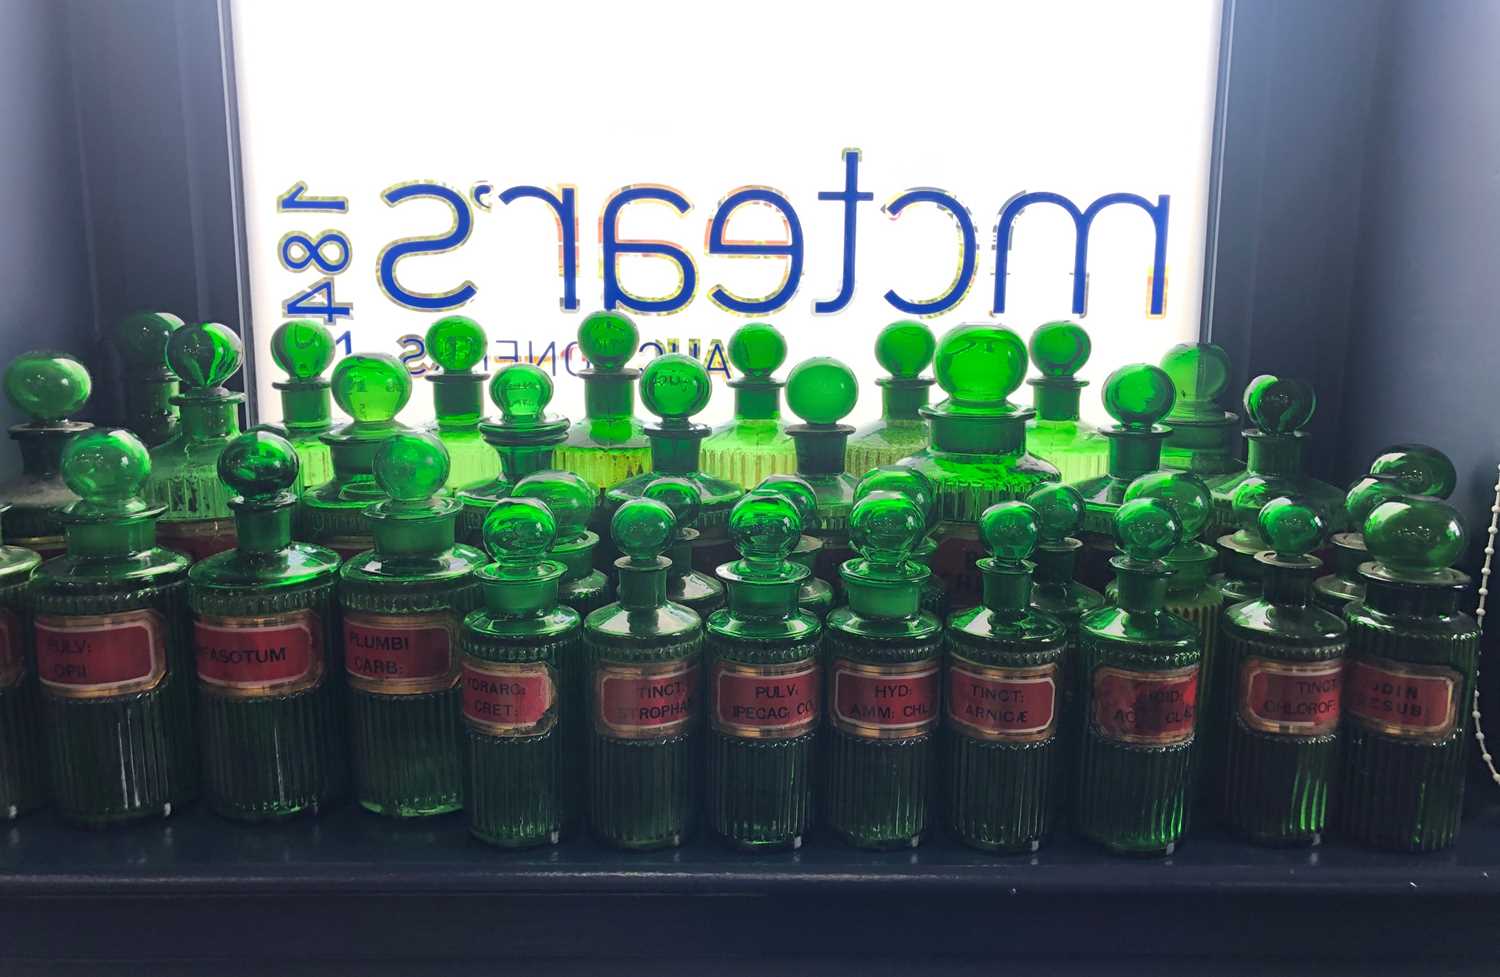 Lot 1058 - A LOT OF EARLY 20TH CENTURY GREEN GLASS PHARMACEUTICAL BOTTLES